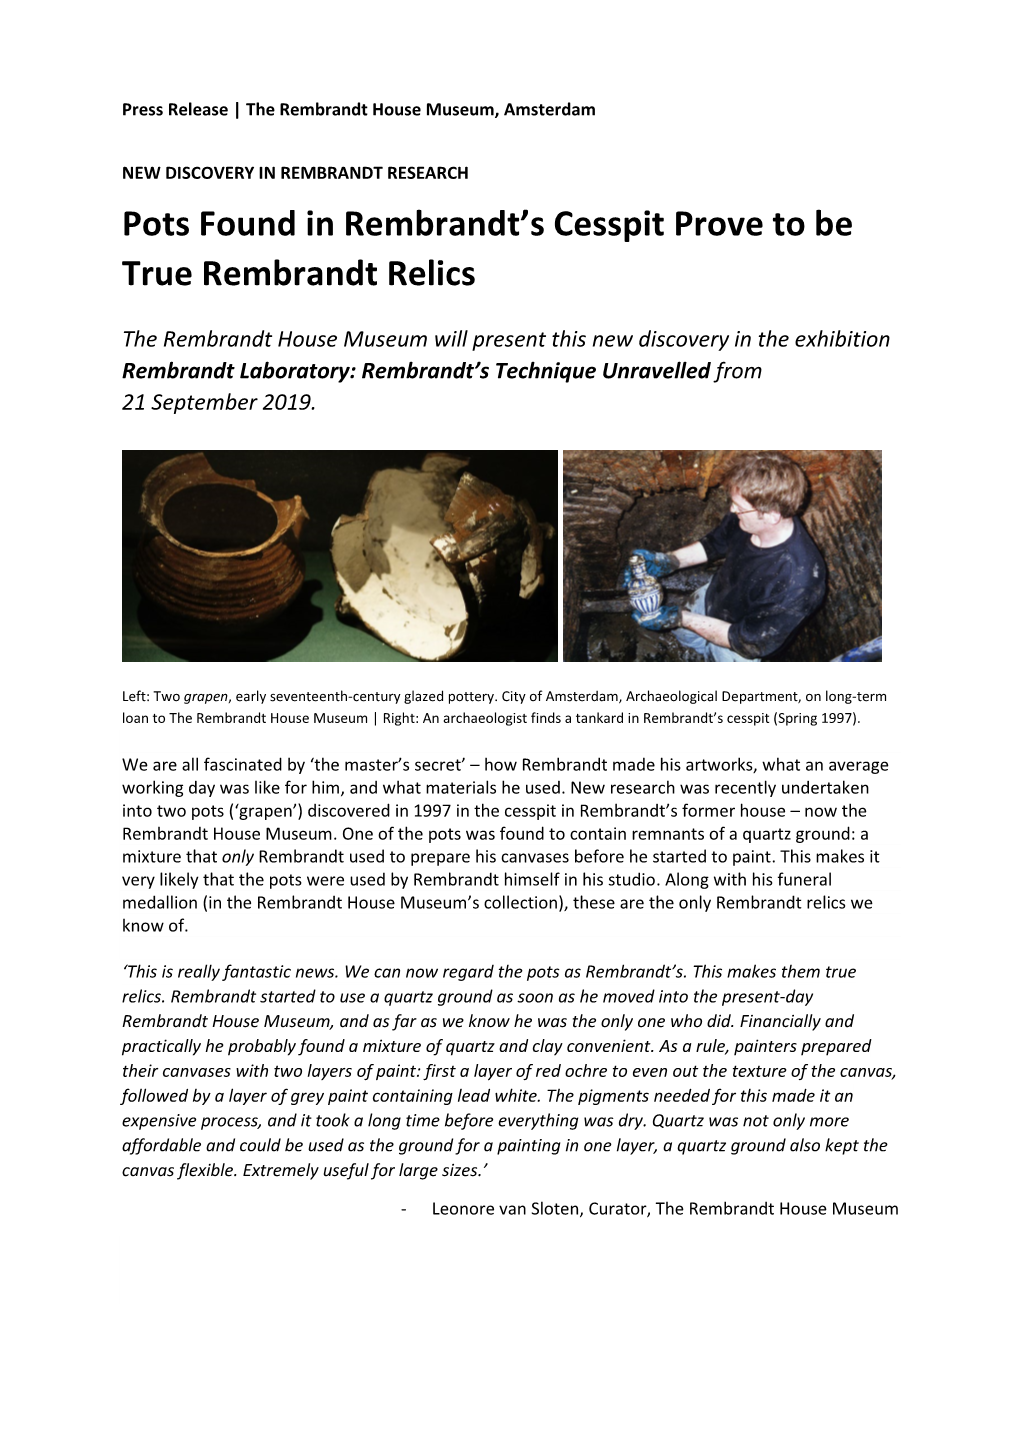 Pots Found in Rembrandt's Cesspit Prove to Be True Rembrandt Relics